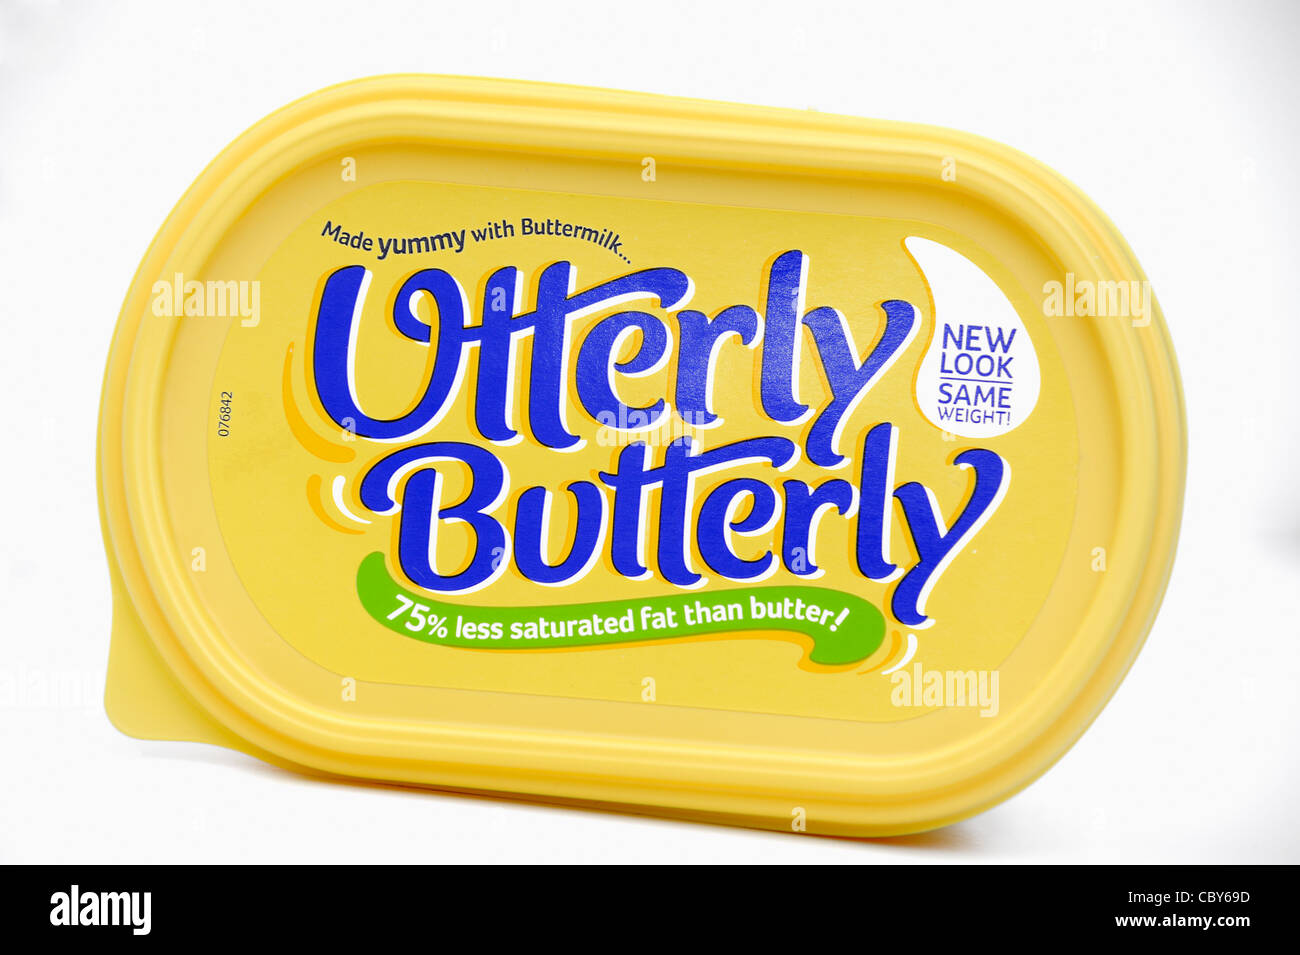 utterly butterly english packaging Stock Photo